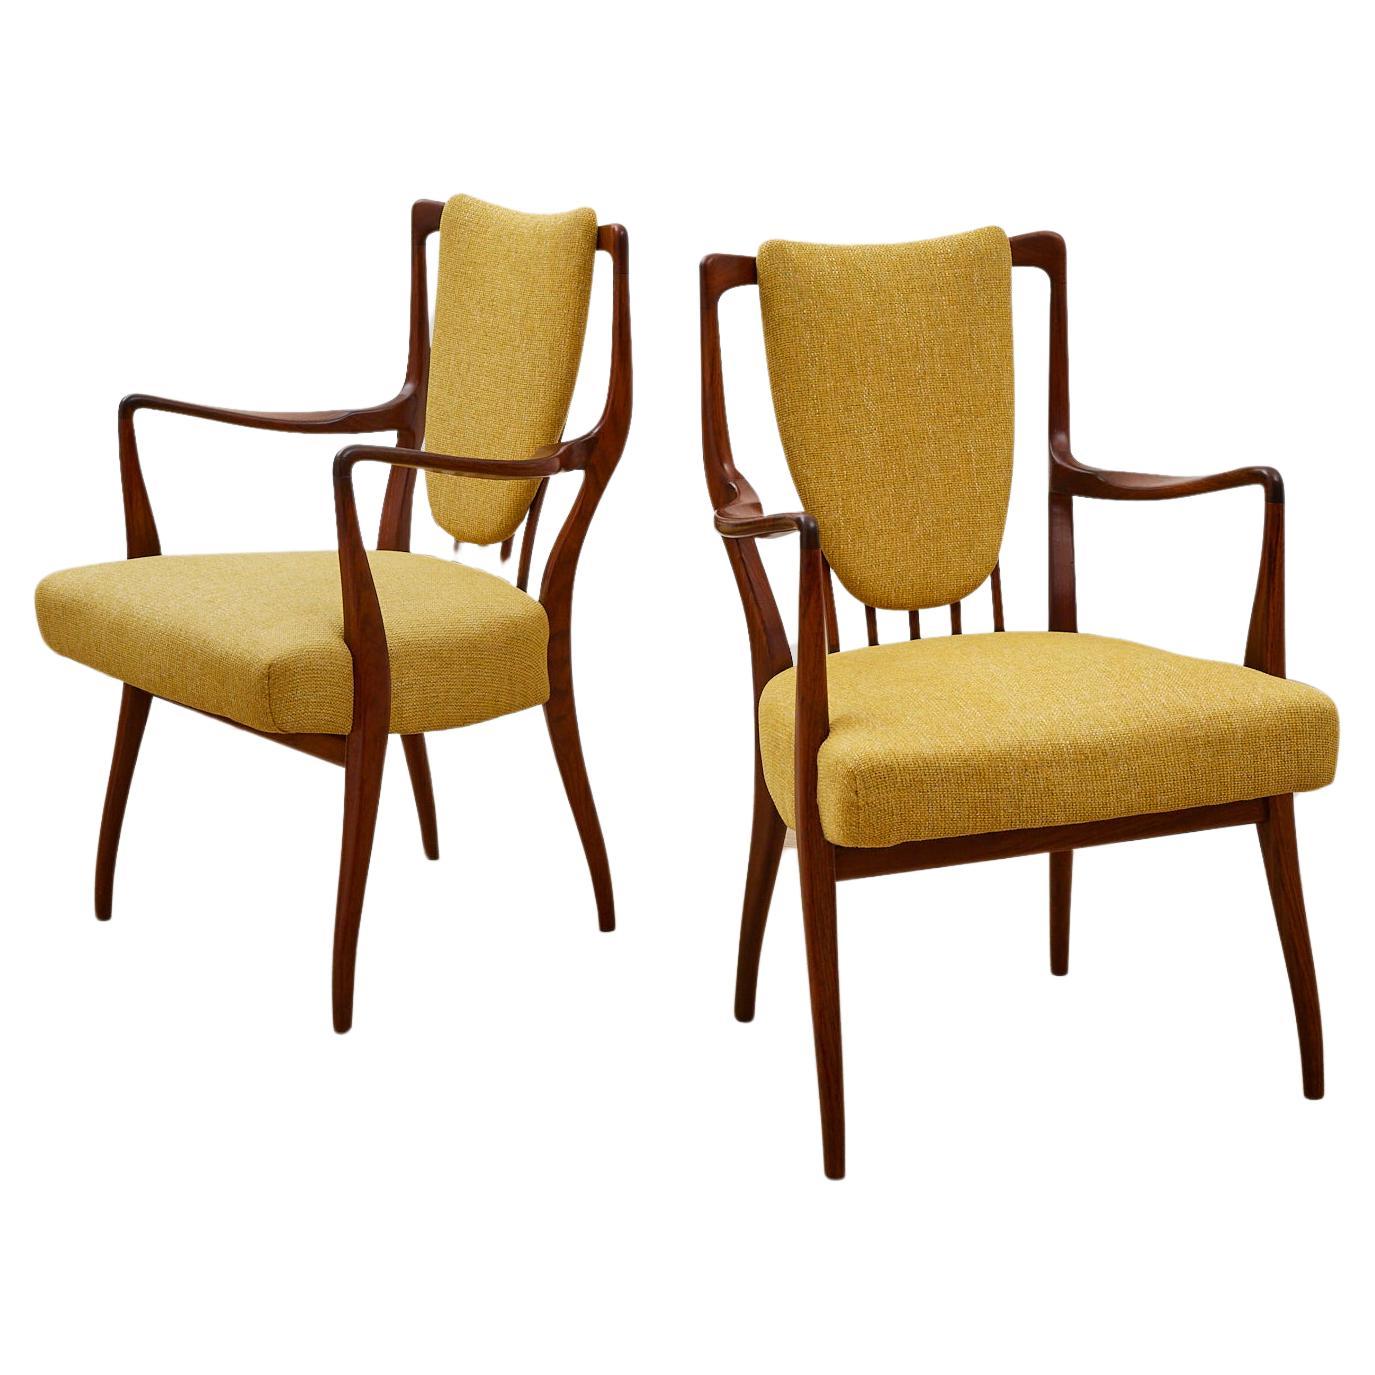 Pair of 1950's Rosewood Side Chairs by A.J Milne